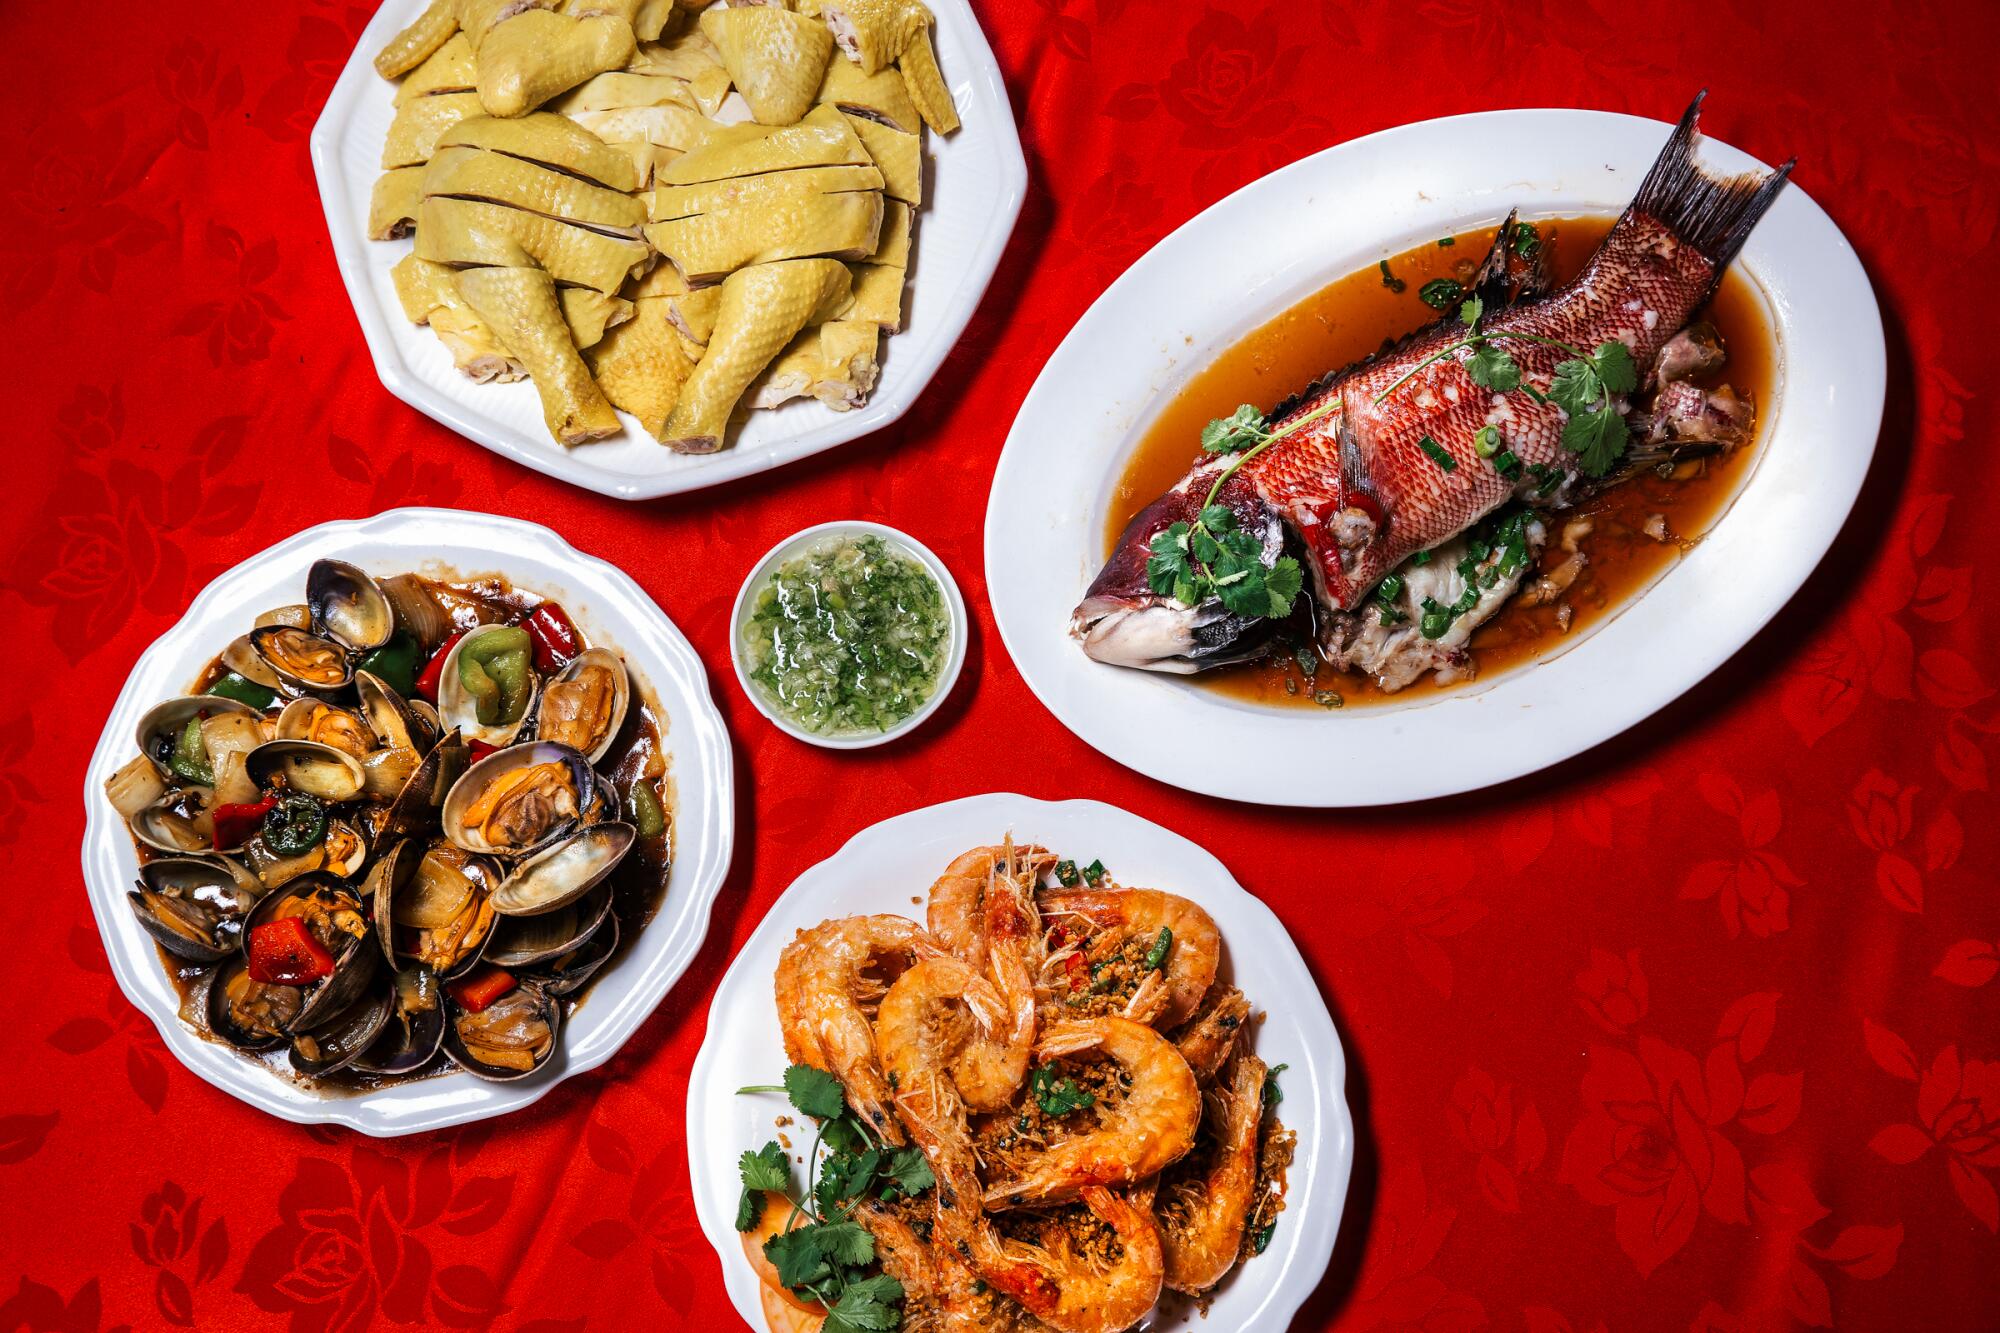 Lunar New Year foods to love: whole fish, spring rolls, noodles